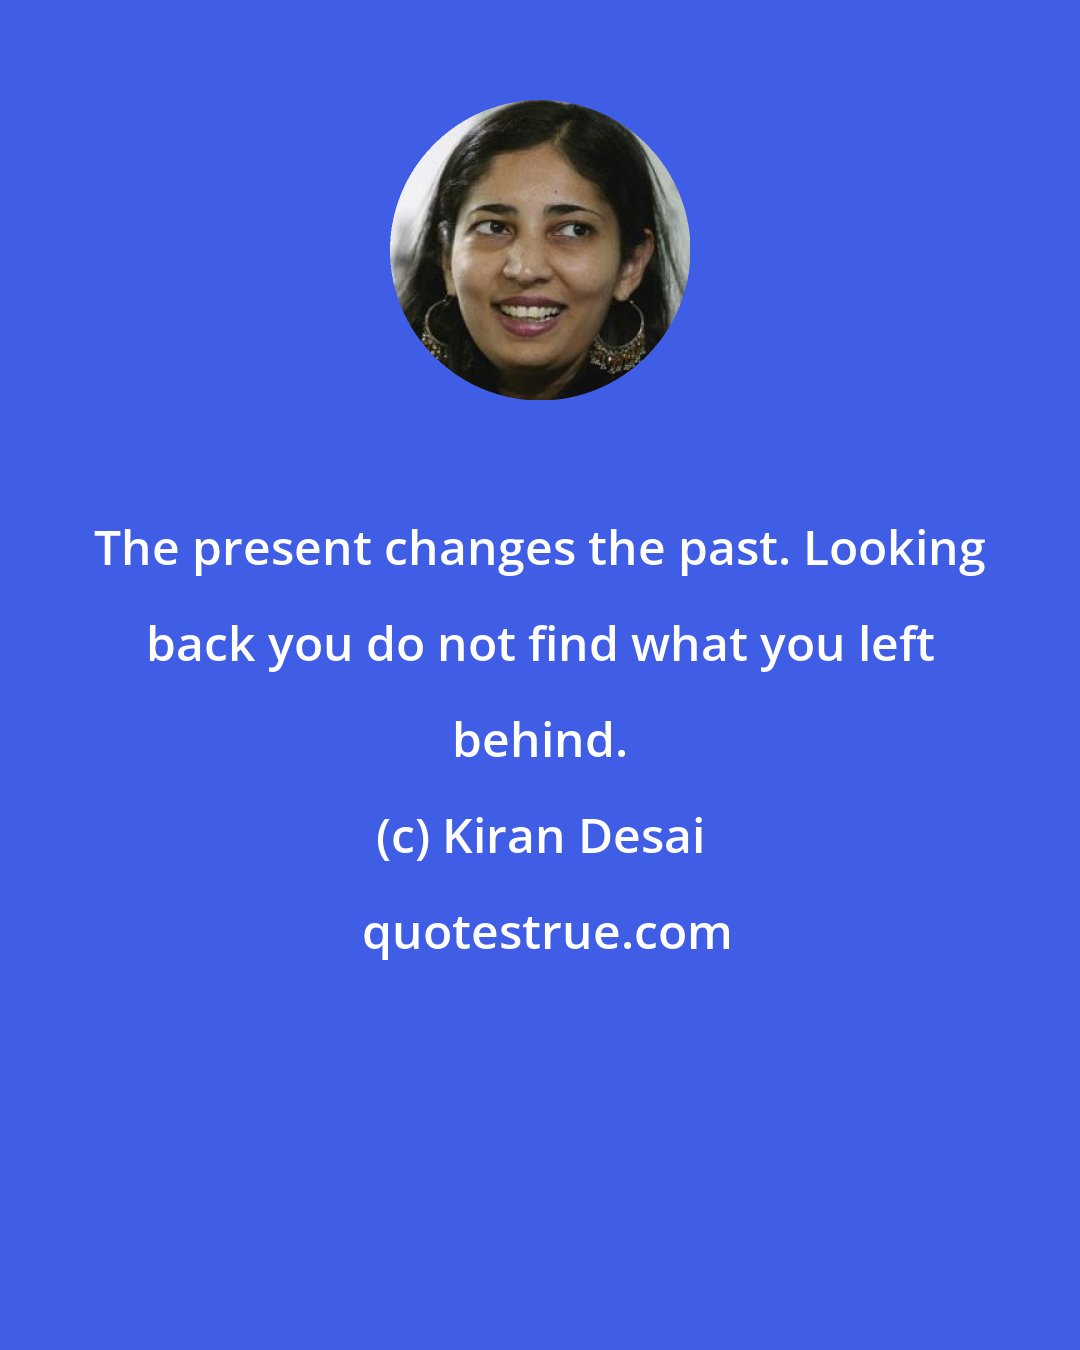 Kiran Desai: The present changes the past. Looking back you do not find what you left behind.